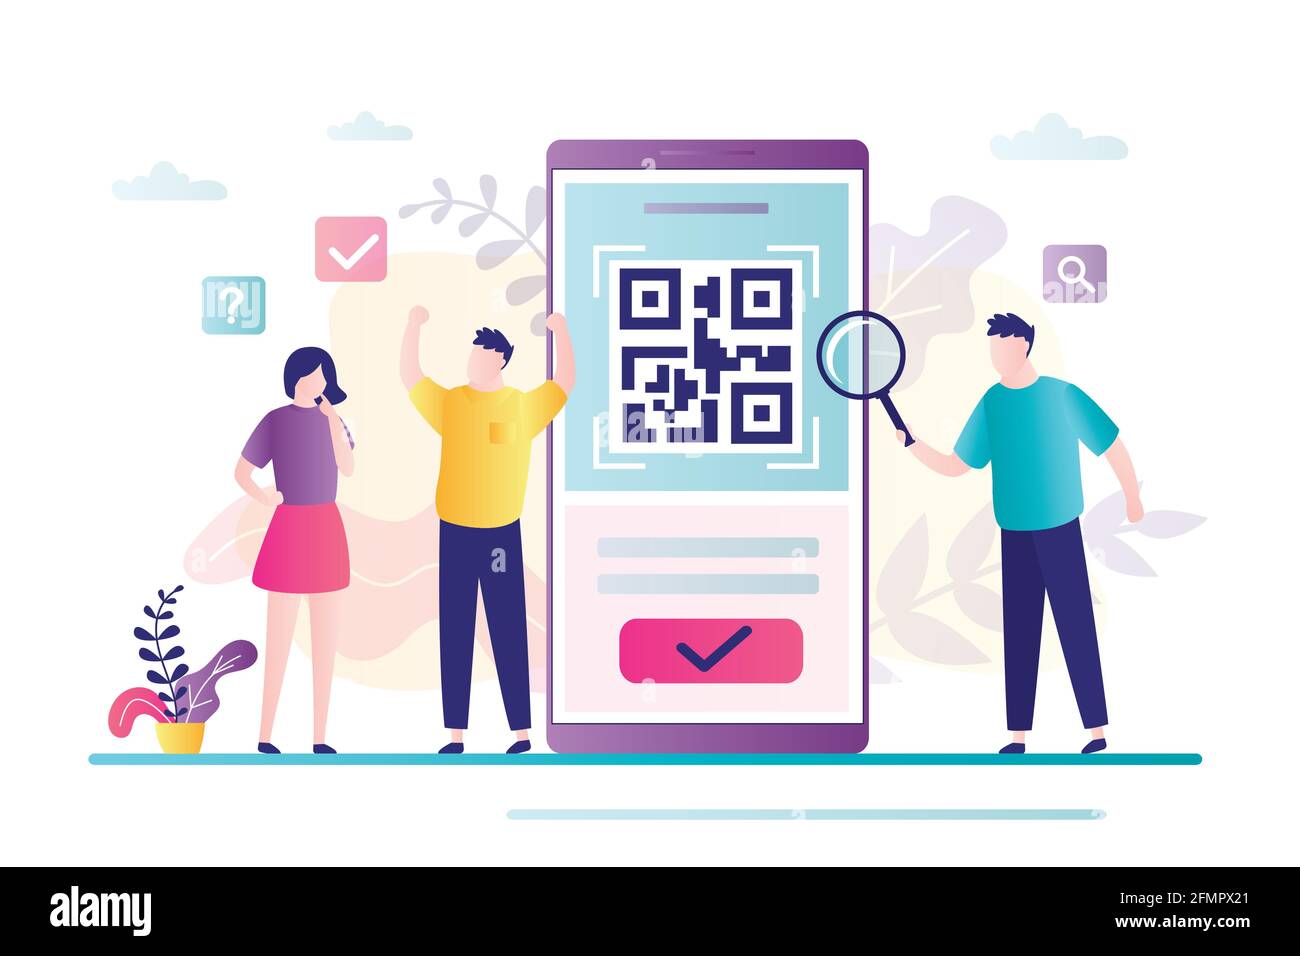 People scanning qr code for payment via smartphone. Group of businesspeople scan code using mobile phone. Smart technology for internet and mobile pay Stock Vector